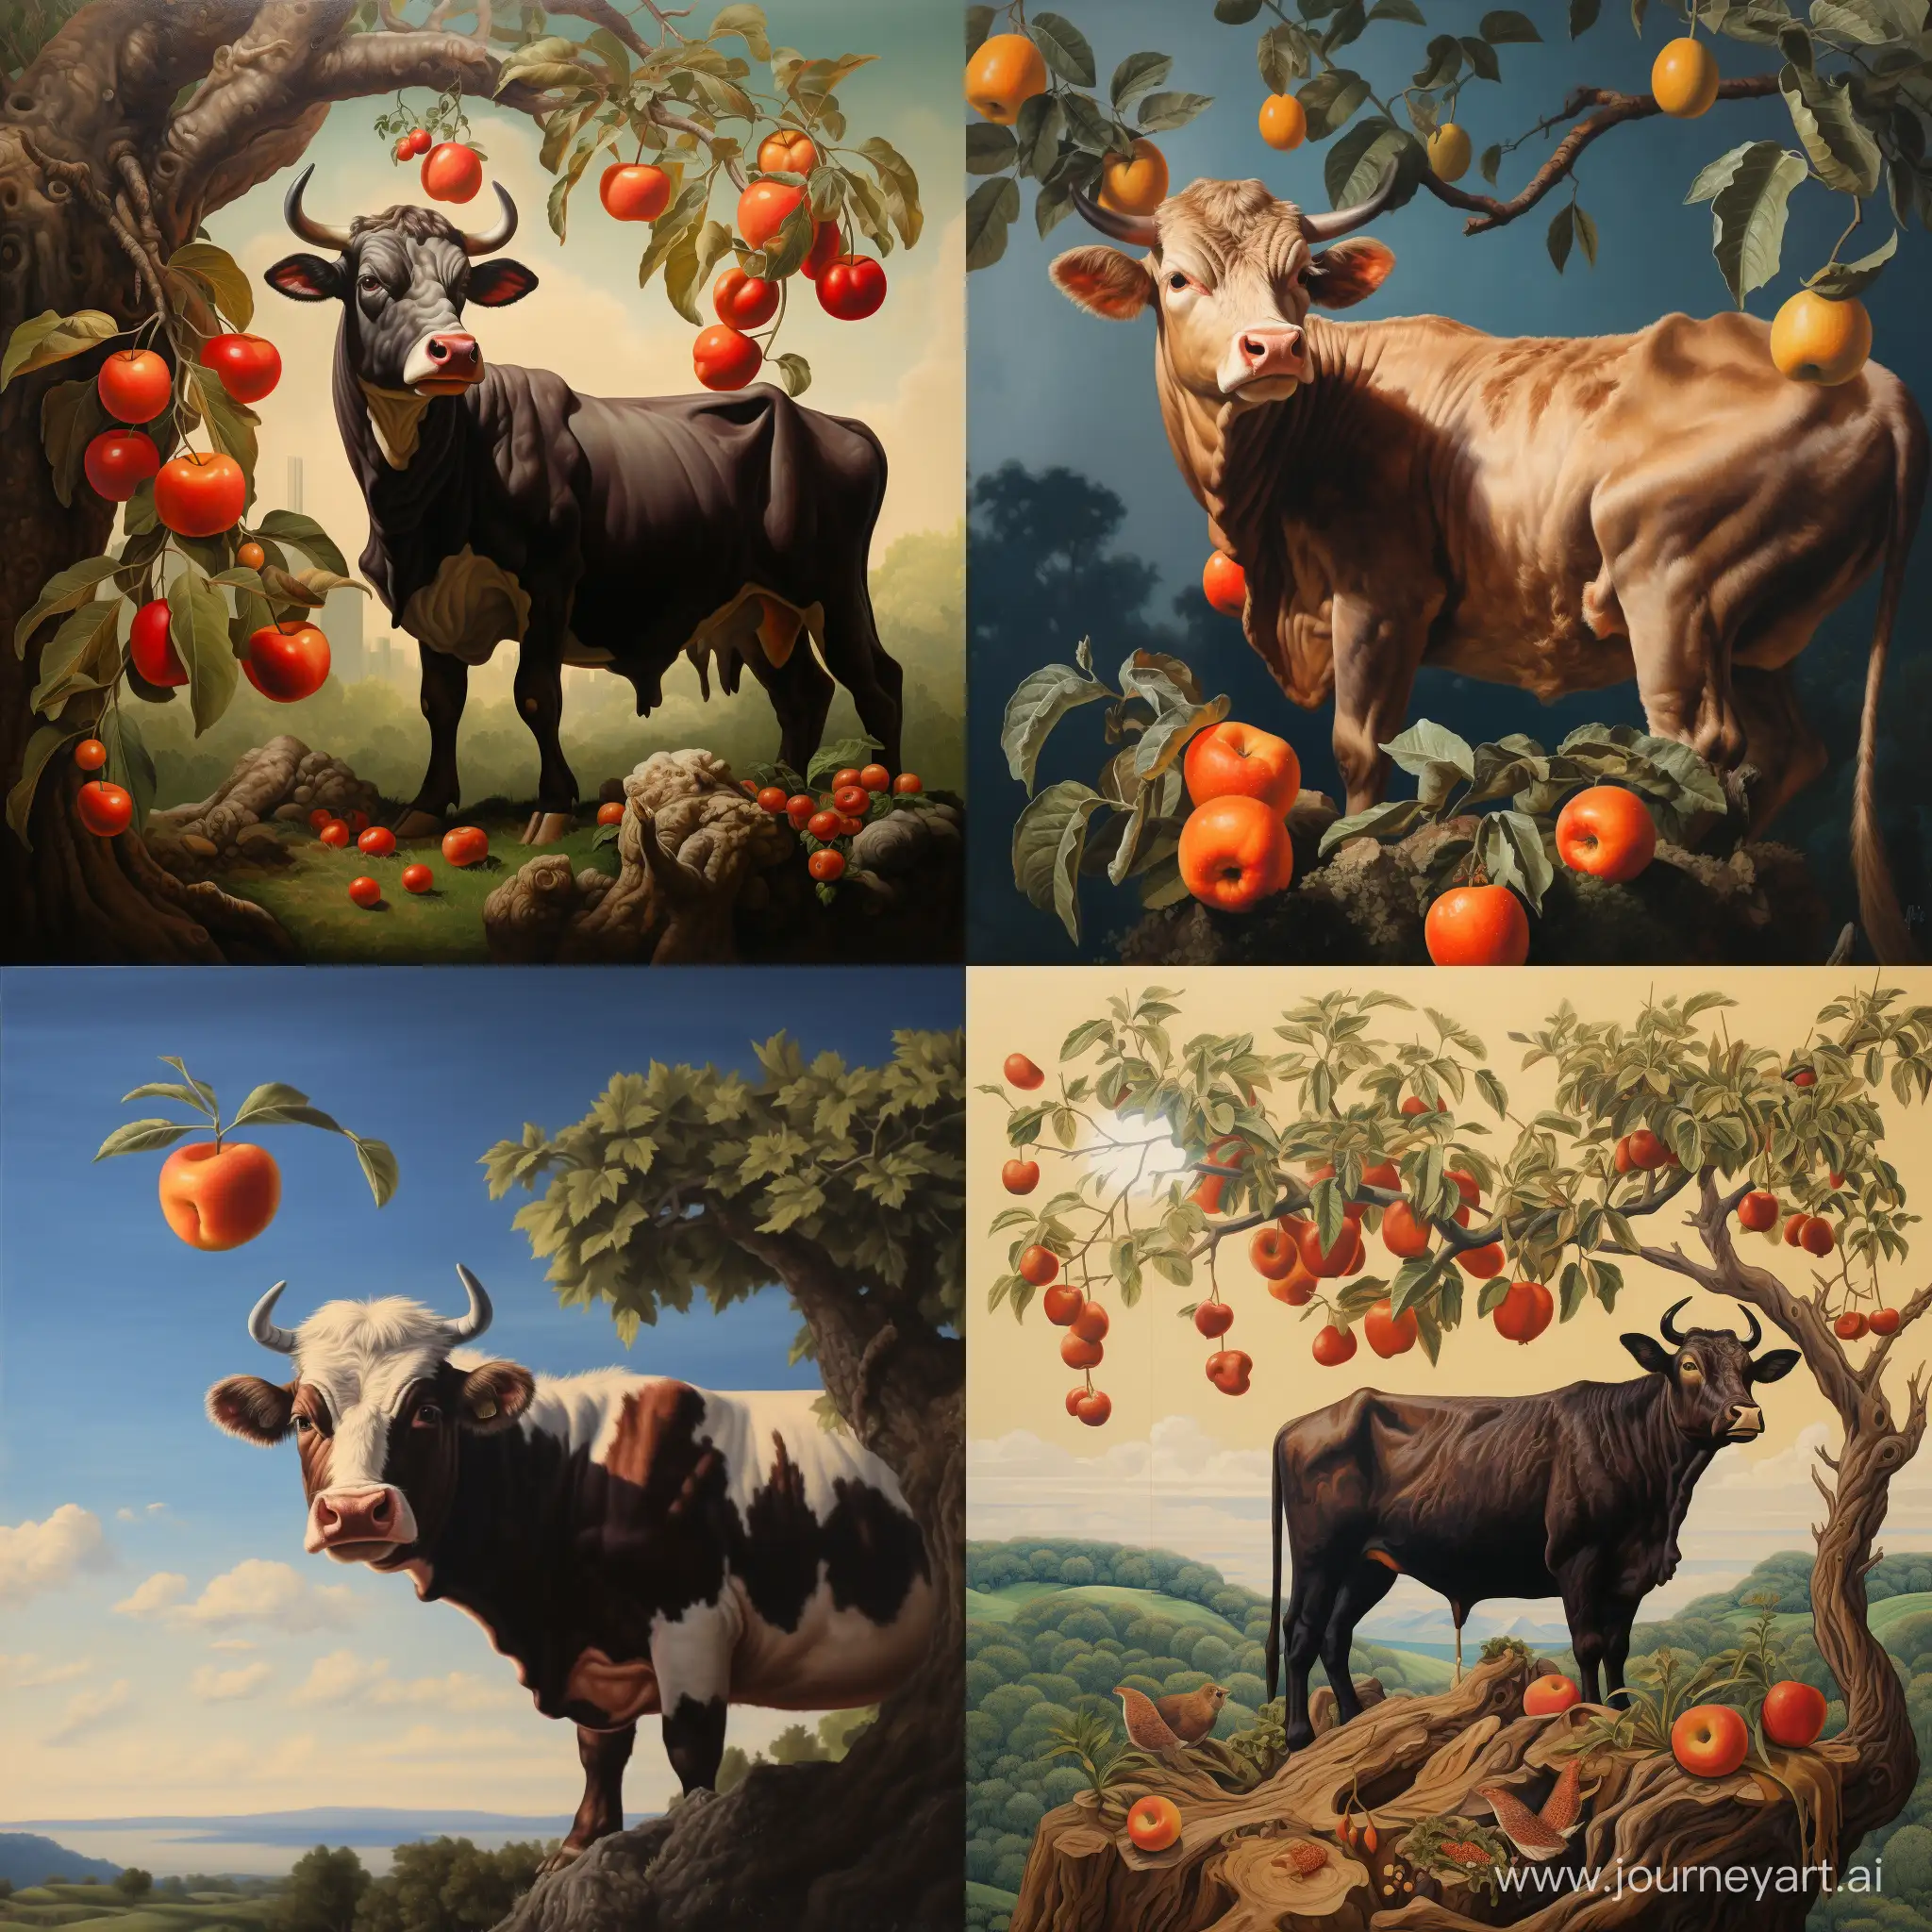 Bucolic-Scene-Curious-Cow-Enjoying-a-Tomato-Up-in-a-Tree